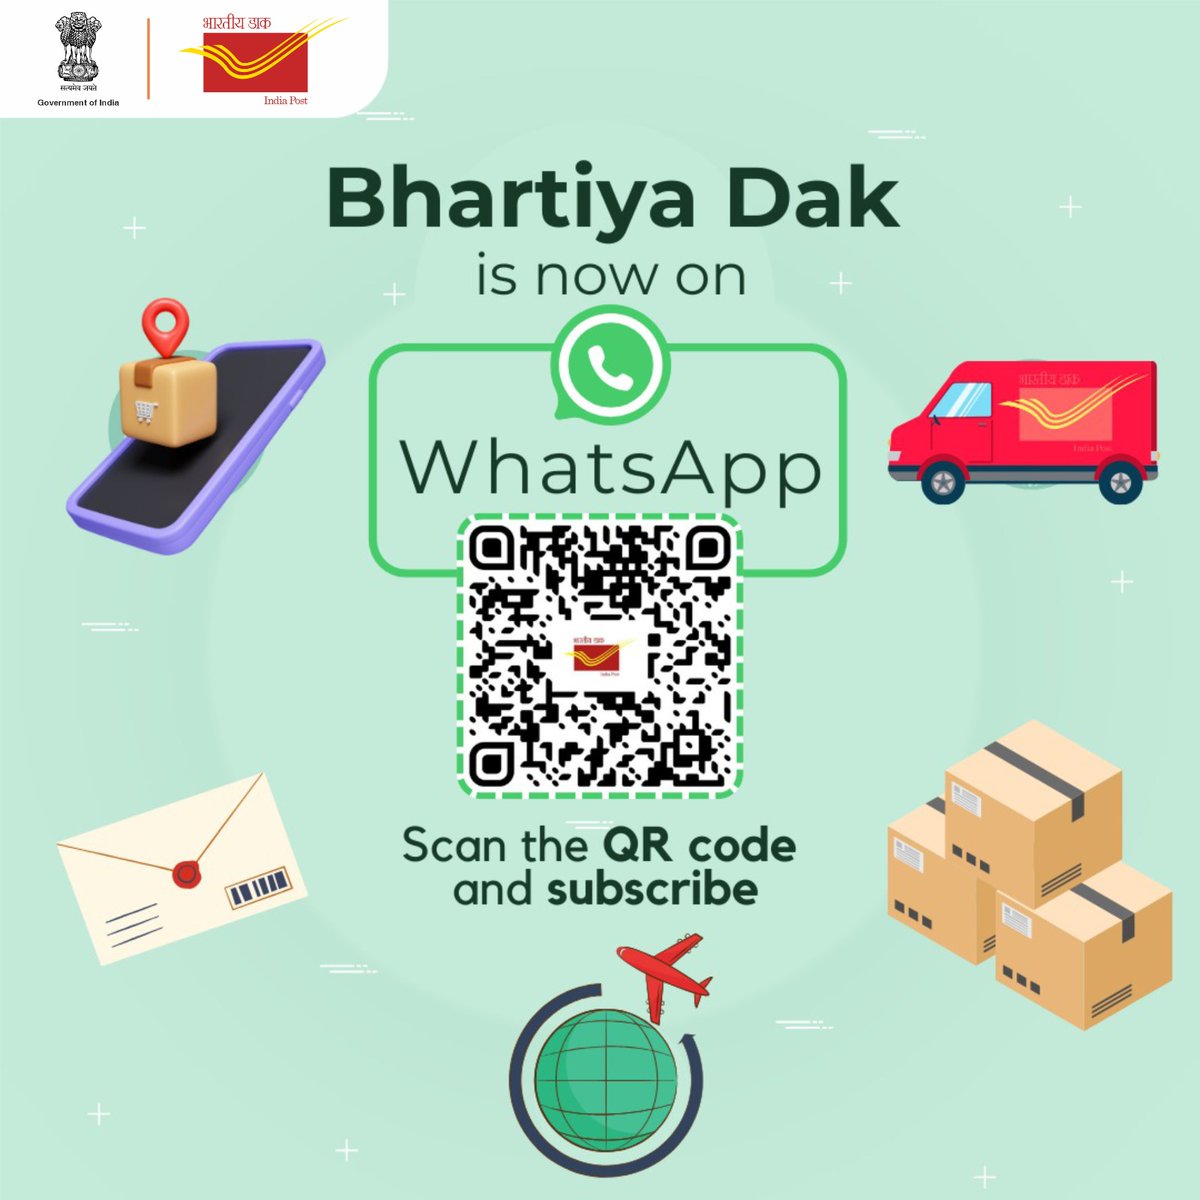 Join our official WhatsApp Channel! Get instant updates, details about exclusive doorstep services, and more! Simply scan the QR code or click the link 👇 whatsapp.com/channel/0029Va…